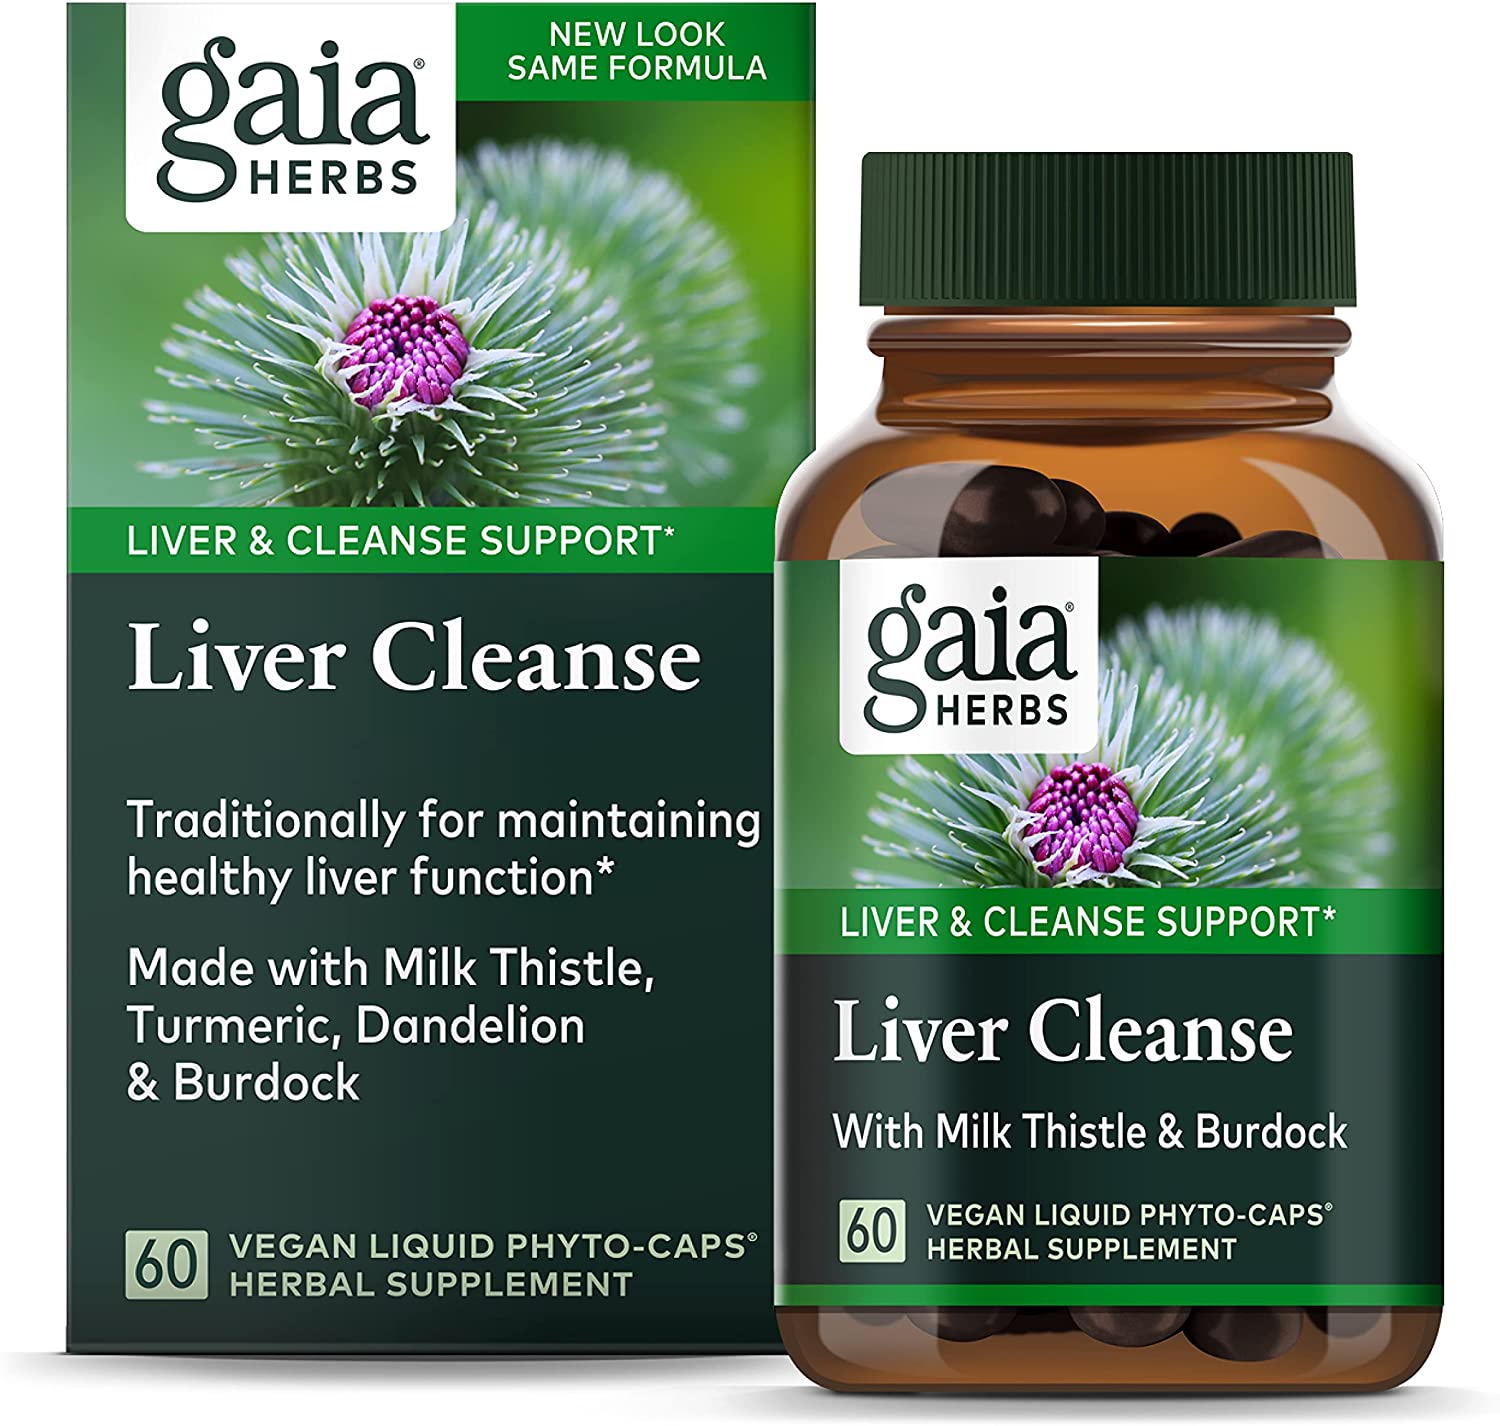 Review of Gaia Herbs Liver Cleanse Liquid Phyto-Capsules